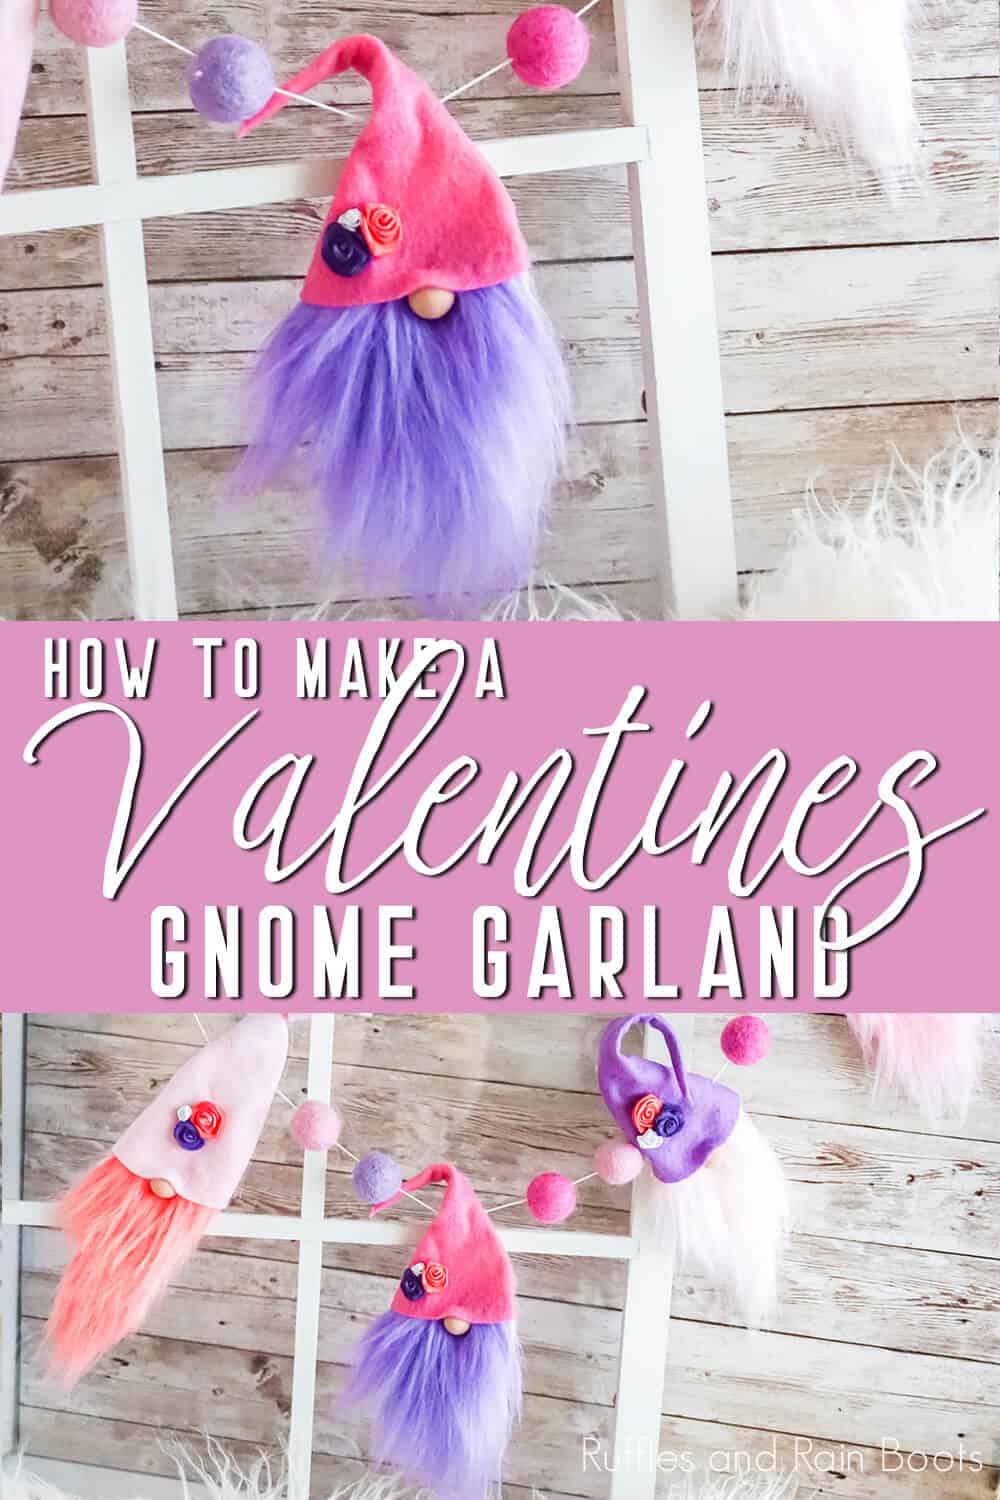 photo collage of diy gnome garland for farmhouse valentines decor with text which reads how to make a valentines gnome garland